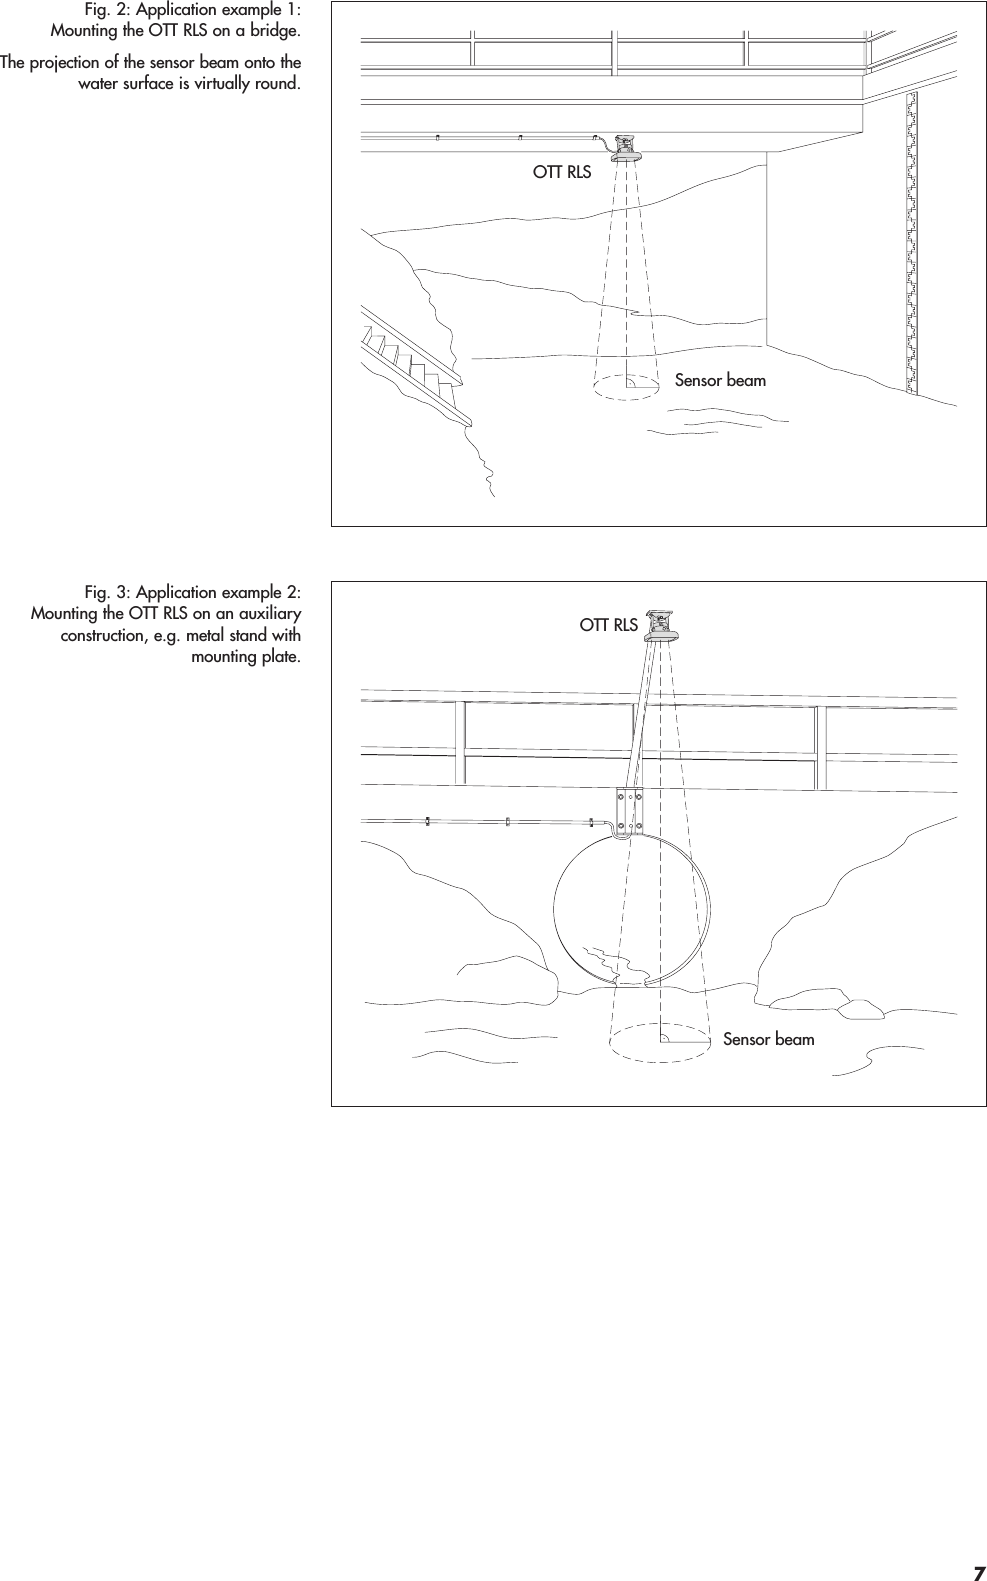 OTT RLSSensor beamFig. 3: Application example 2: Mounting the OTT RLS on an auxiliaryconstruction, e.g. metal stand withmounting plate.OTT RLSSensor beamFig. 2: Application example 1: Mounting the OTT RLS on a bridge.The projection of the sensor beam onto thewater surface is virtually round.7